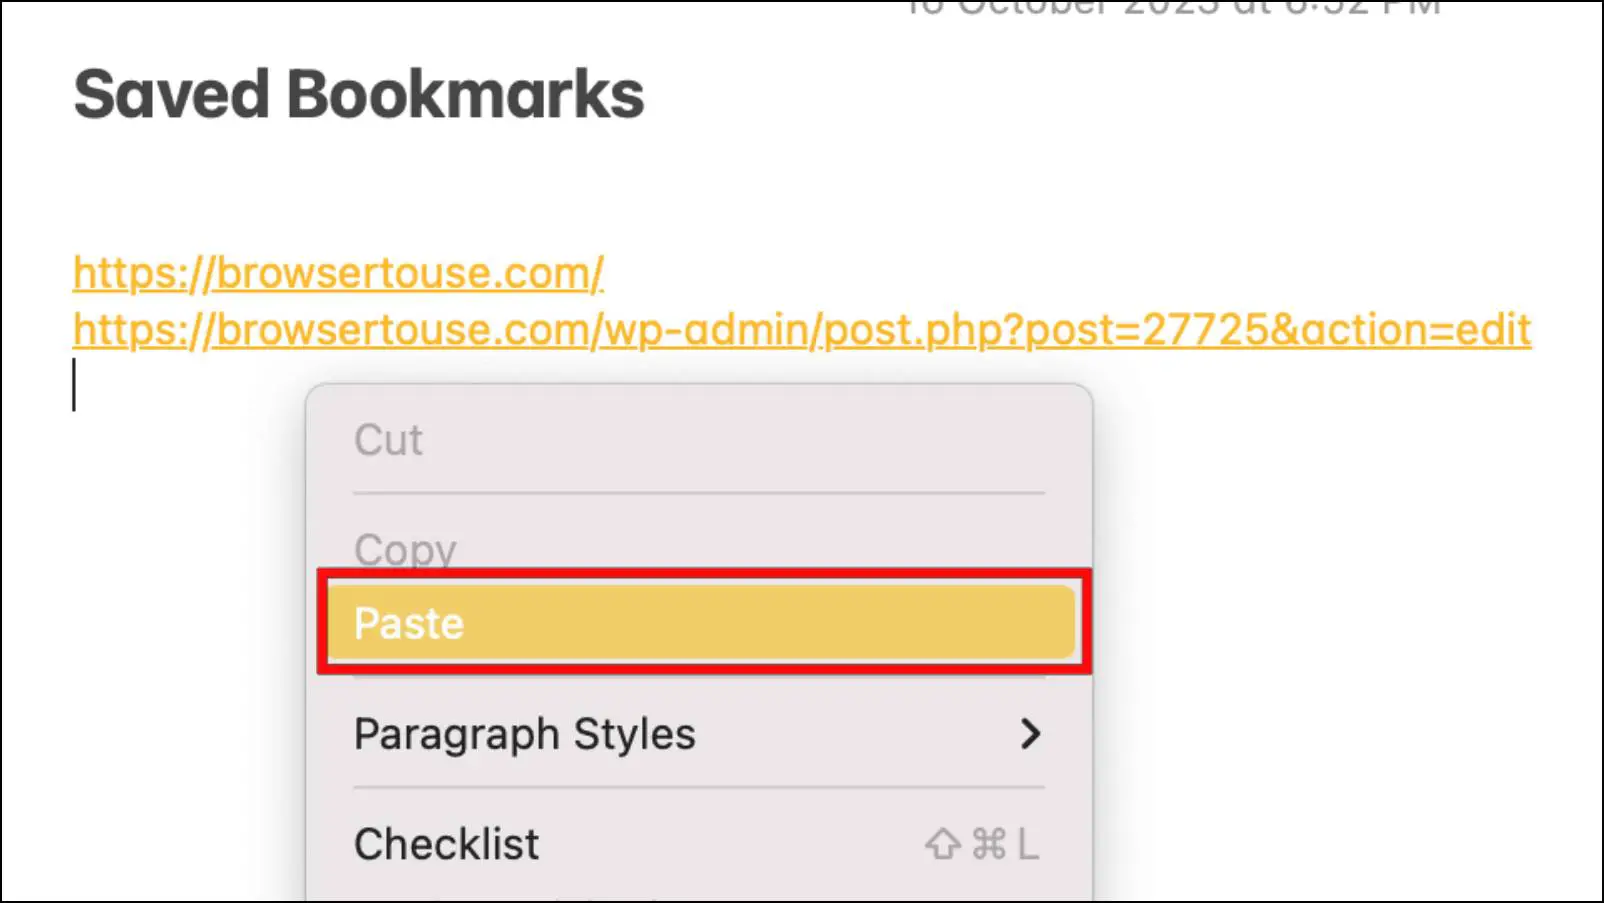 Paste the Copied Bookmarks in this Note